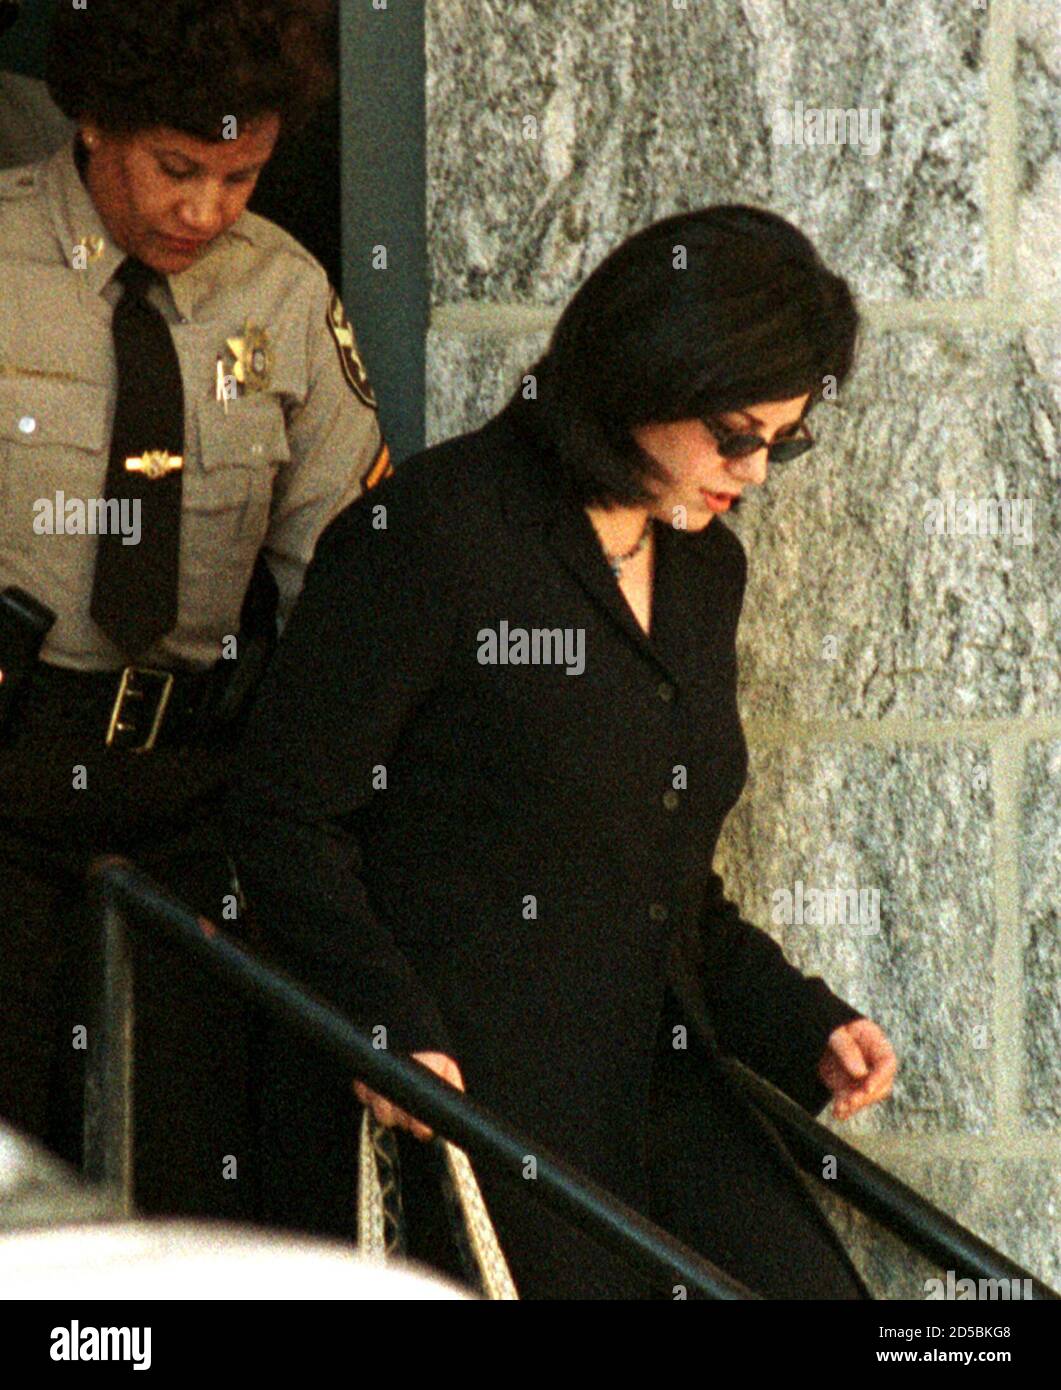 Former White House intern Monica Lewinsky leaves the Howard County Courthouse, December 16. [Lewinsky testified on Thursday she never gave Linda Tripp permission to tape-record their telephone conversations about her relationship with President Bill Clinton. In testimony at a pretrial hearing to determine whether Tripp can be tried for alleged violations of Maryland's wiretap law, Lewinsky also said she remembered the date of a conversation that Tripp is charged with recording based on her own recollection -- a crucial point in the prosecutors' case for bringing Tripp to trial. ] Stock Photo